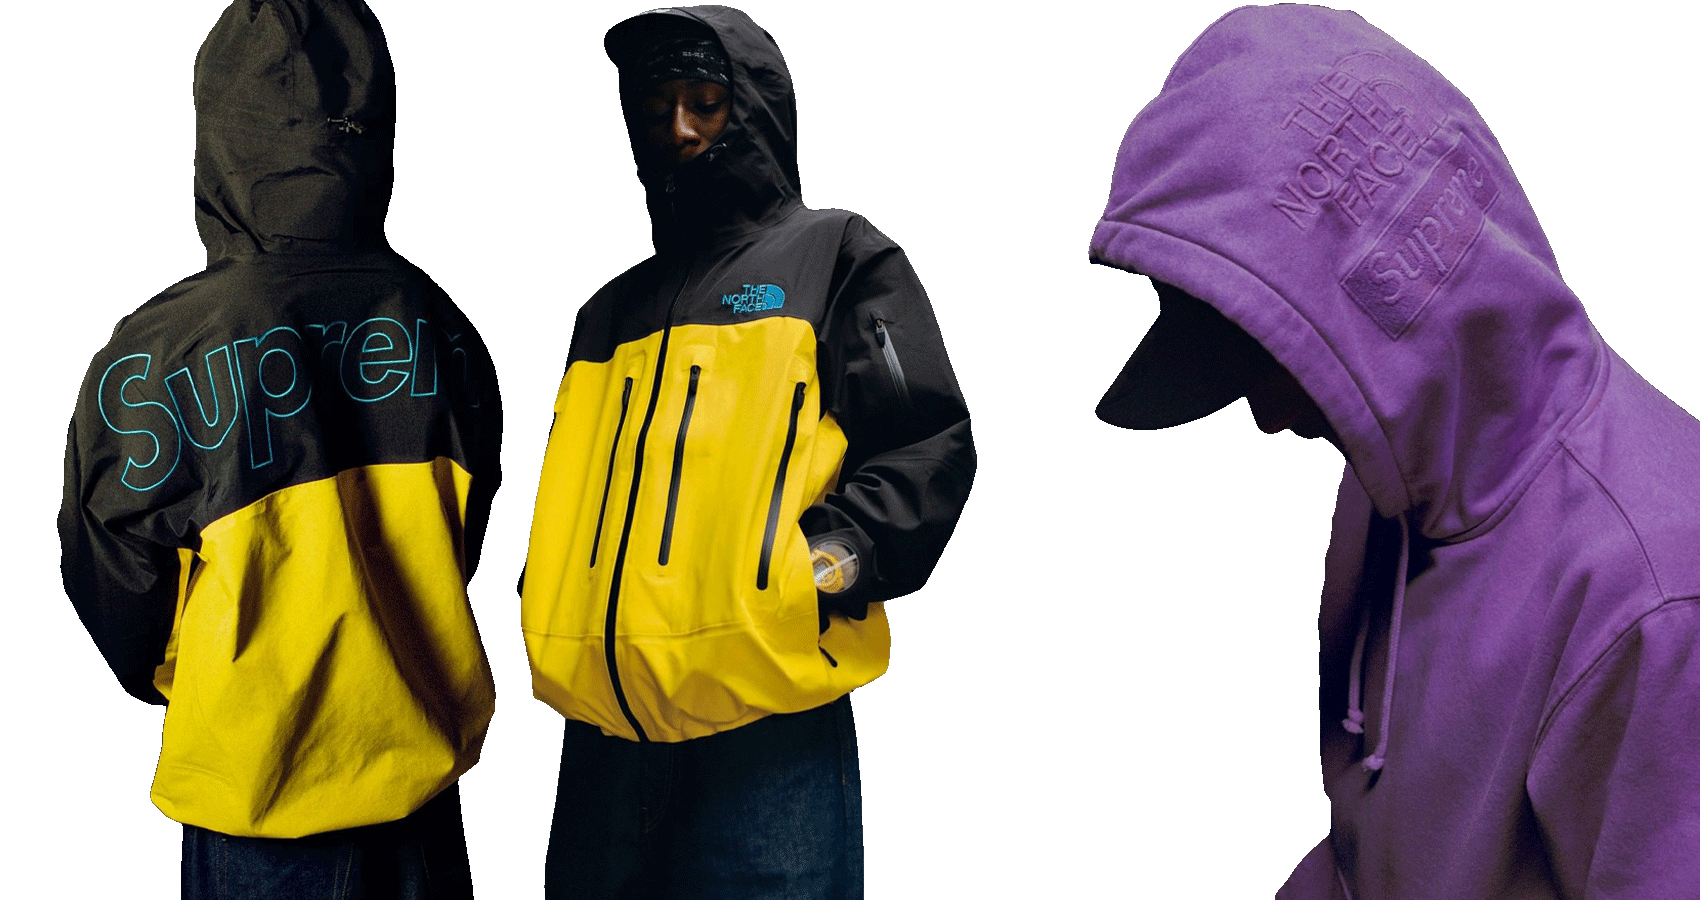 Bloemlezing Birma Blijven Supreme x The North Face Launches 3-Way Collaboration With G-Shock Supreme  x The North Face Launches 3-Way Collaboration With G-Shock